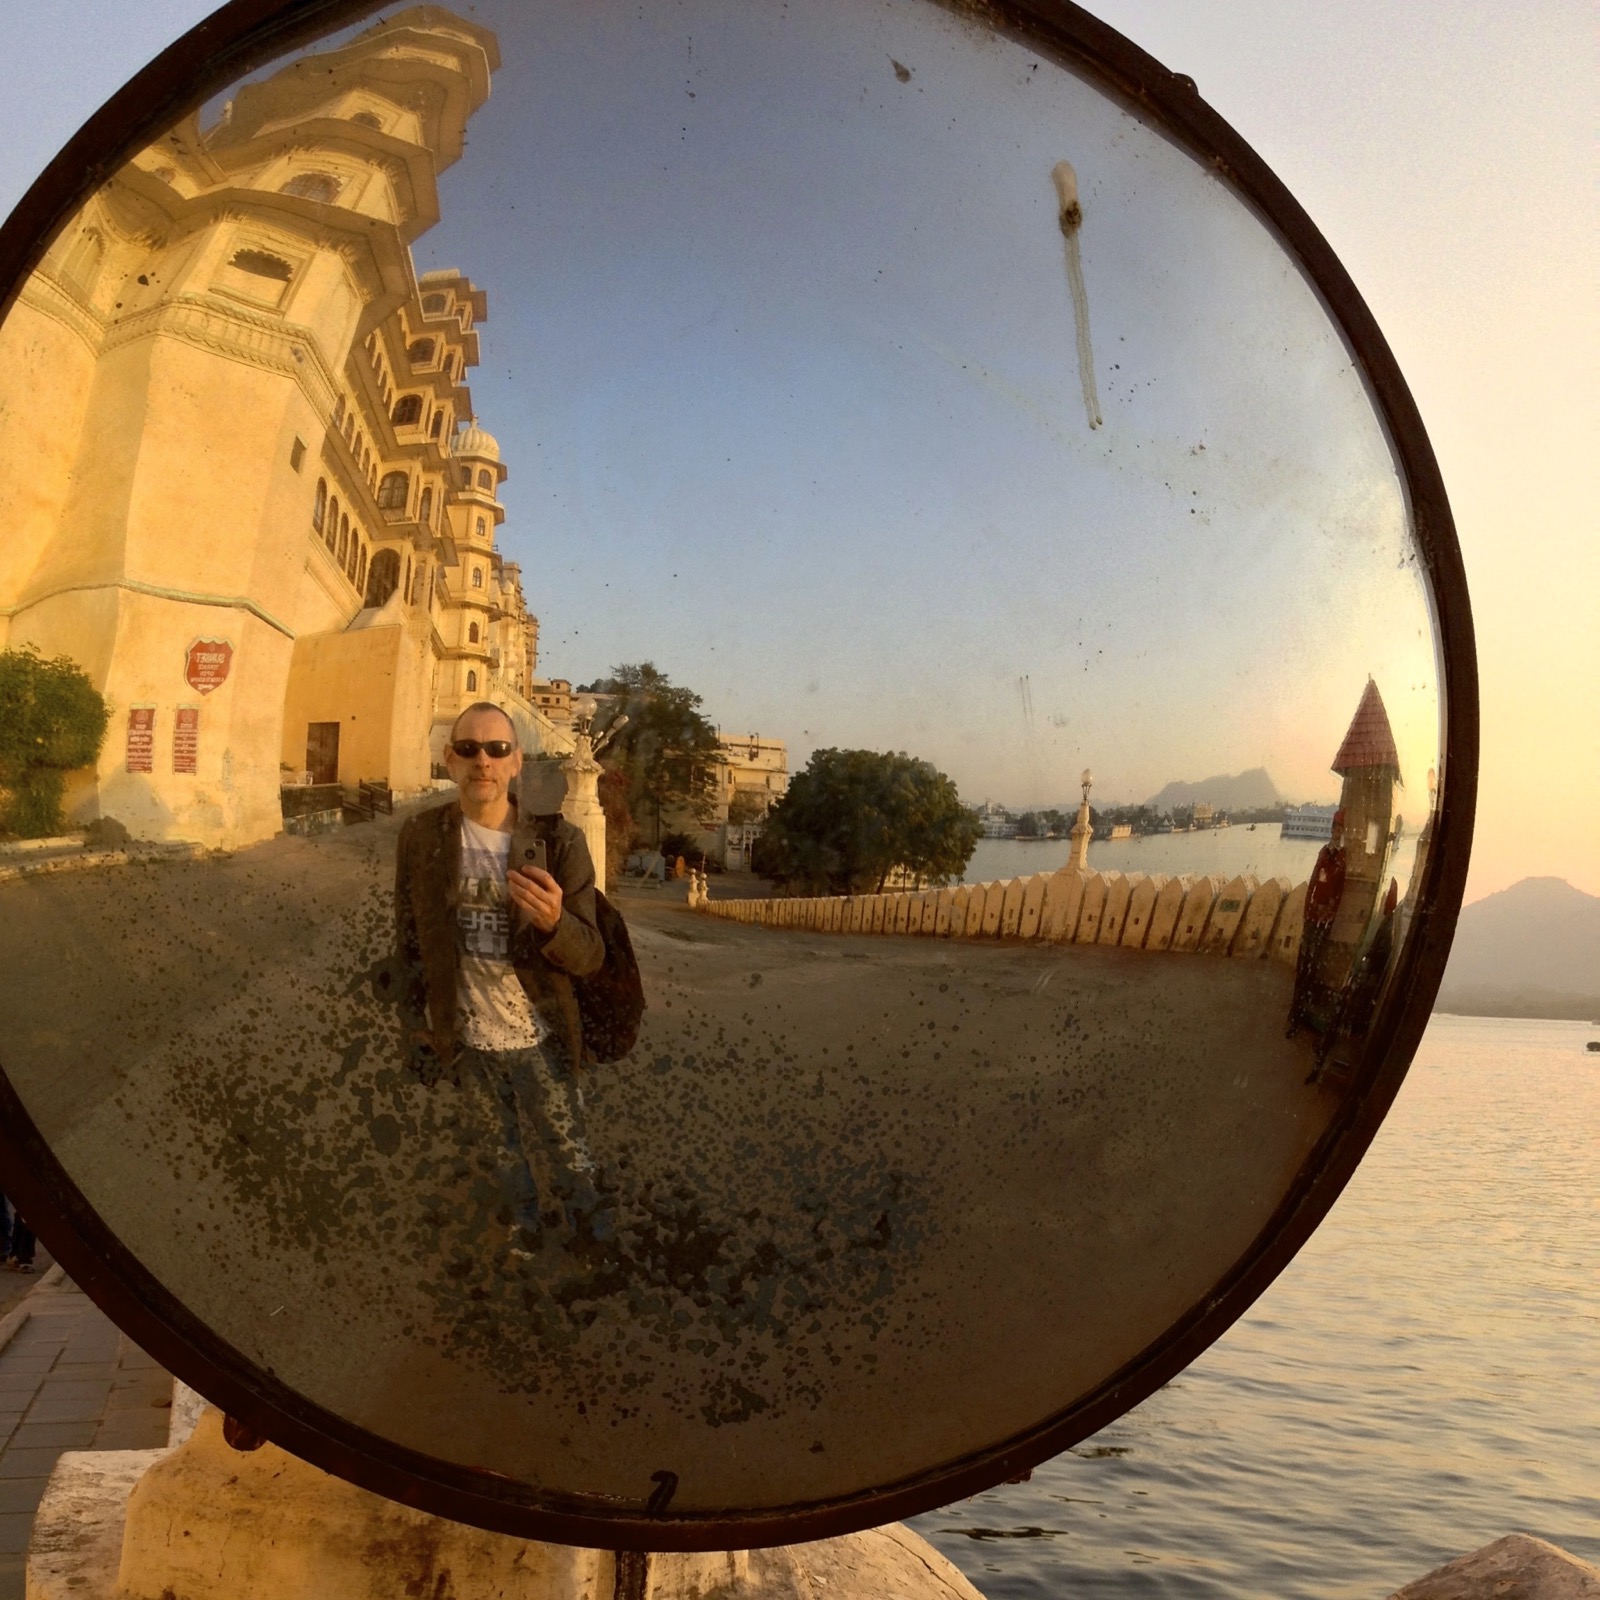 Self Portrait with Palace, Udaipur